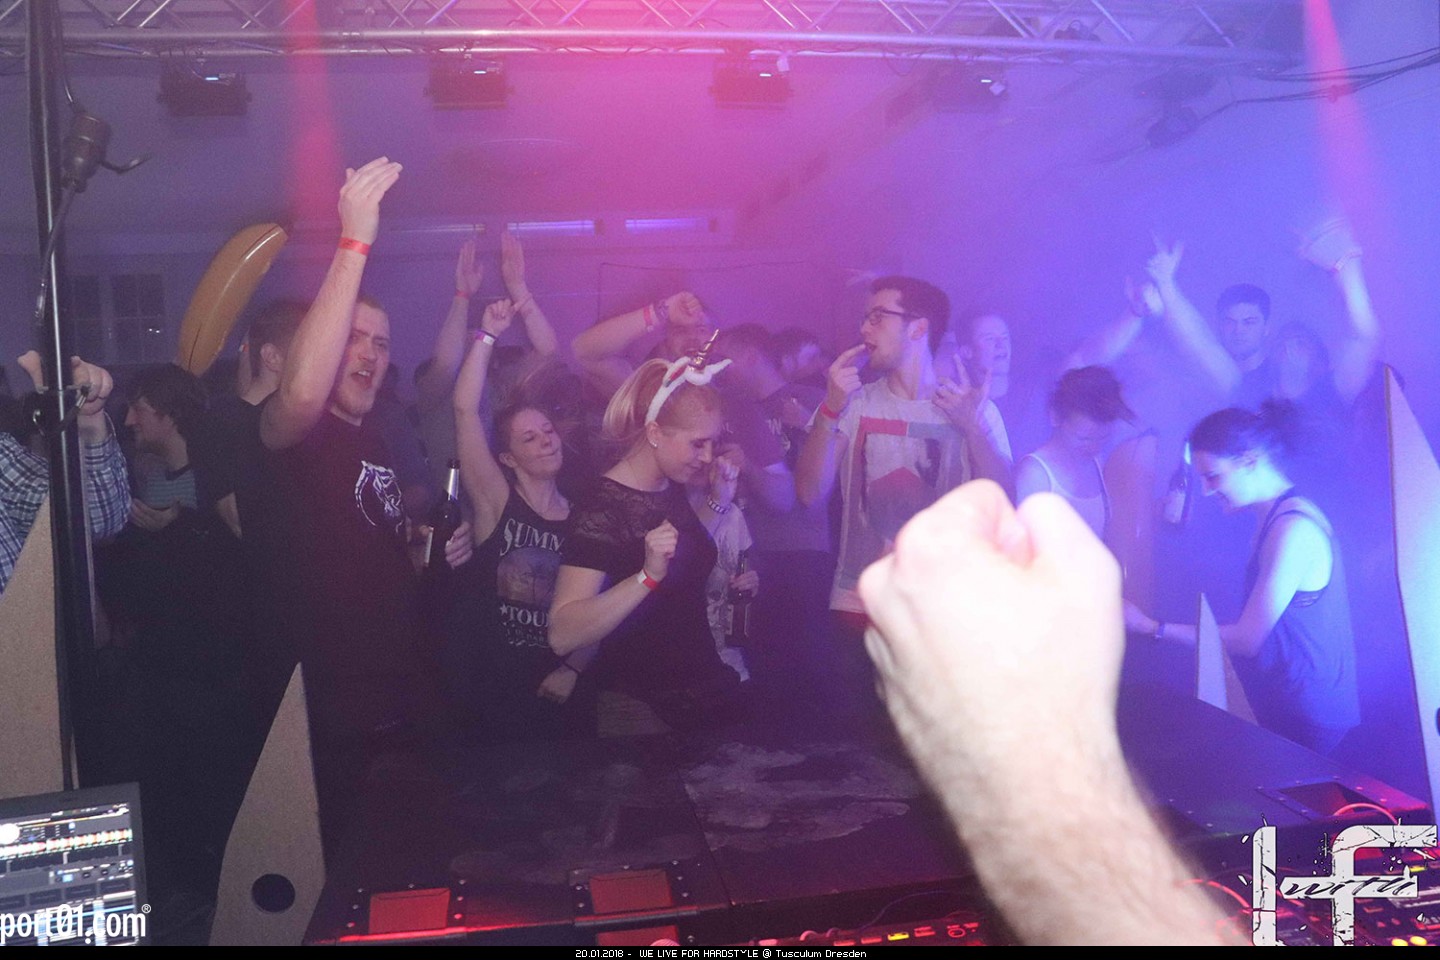  WE LIVE FOR HARDSTYLE @ Tusculum Dresden